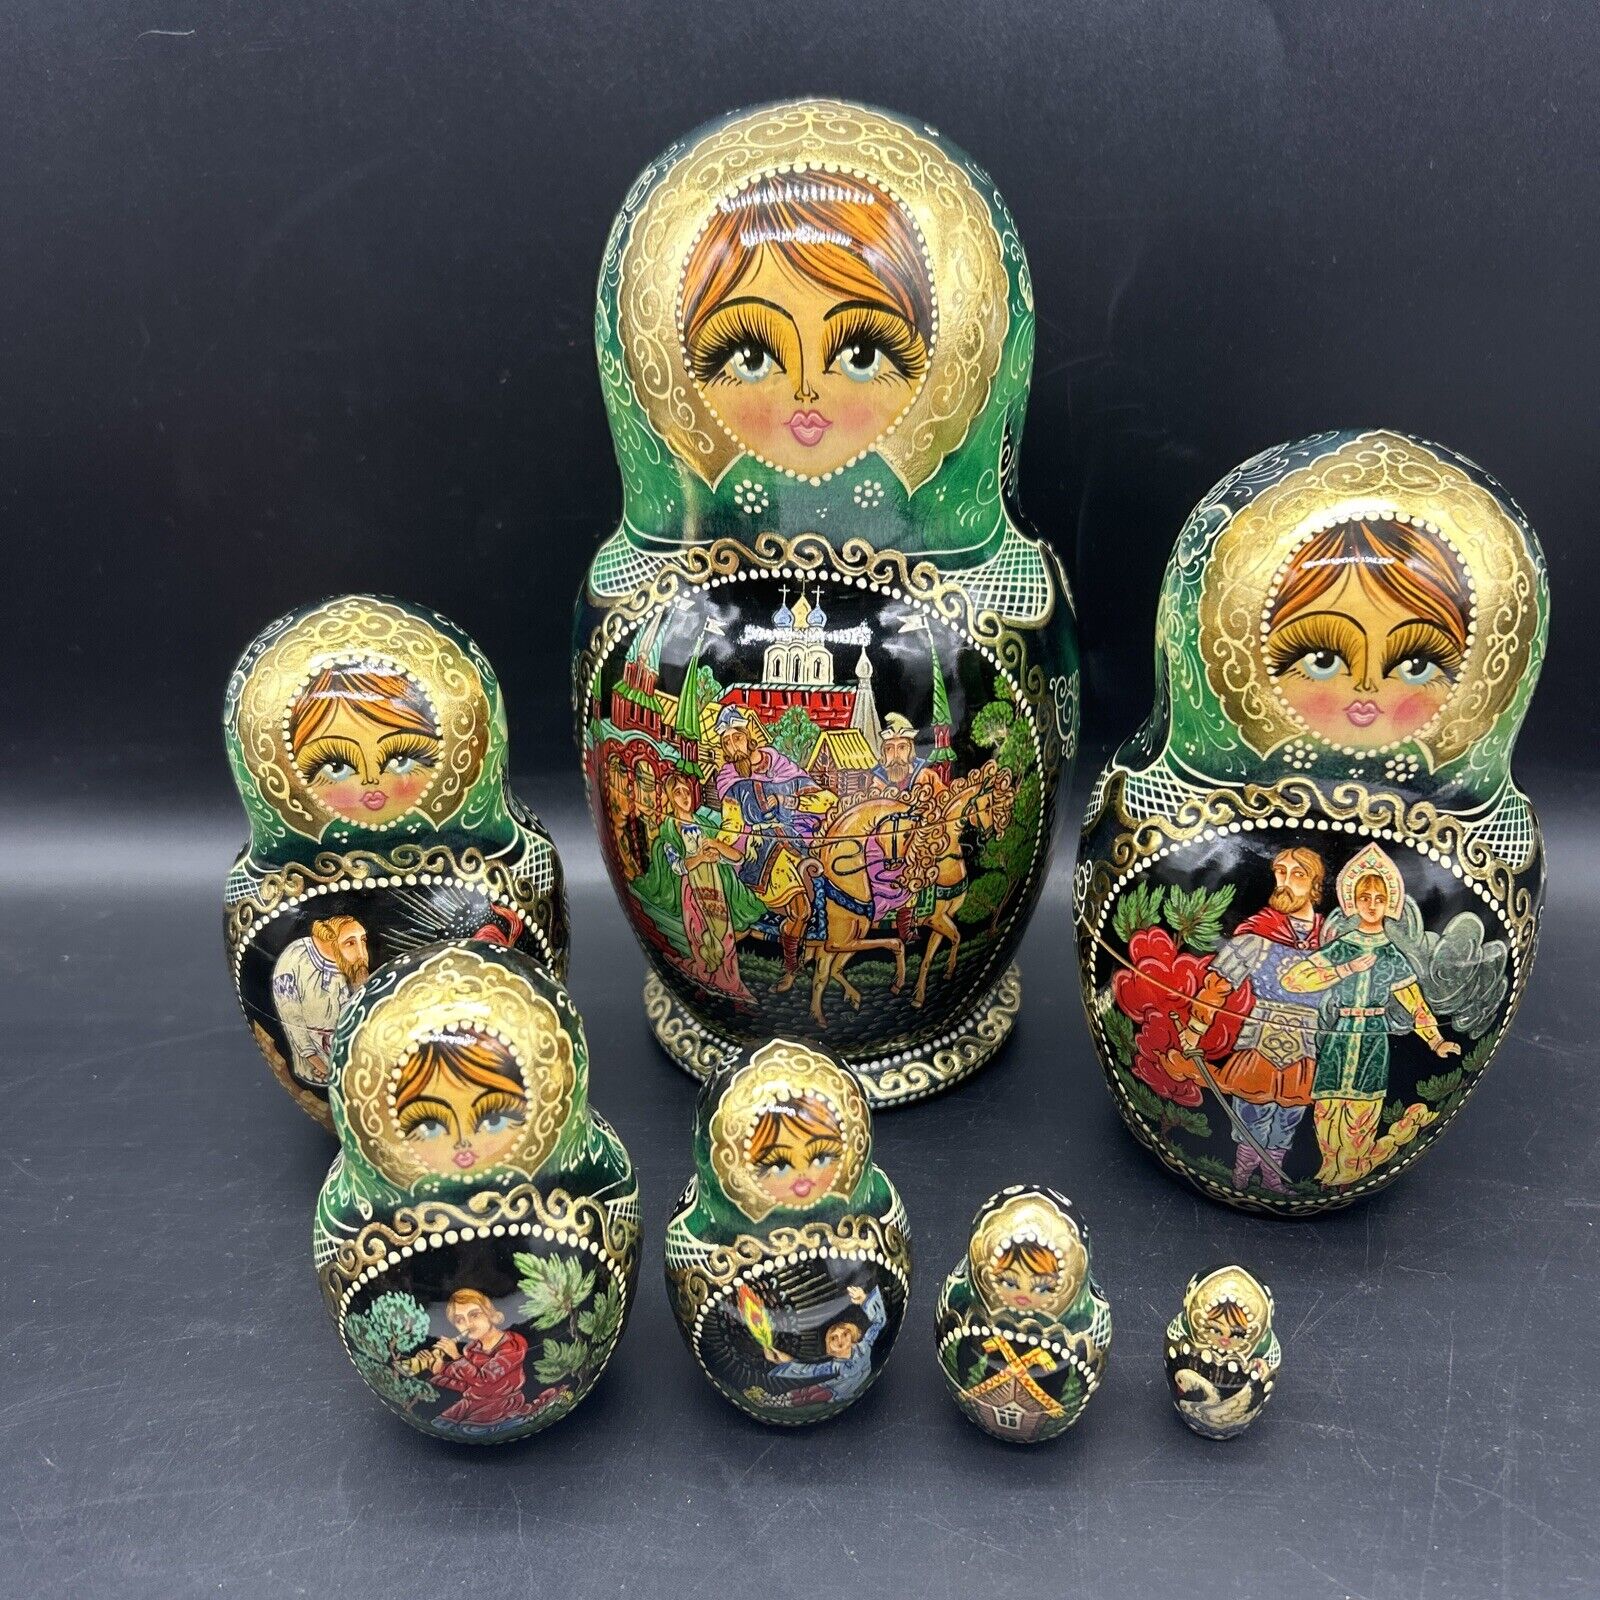 Matryoshka Russian Nesting Dolls 7pc Exquisite Hand Painted On Each Doll